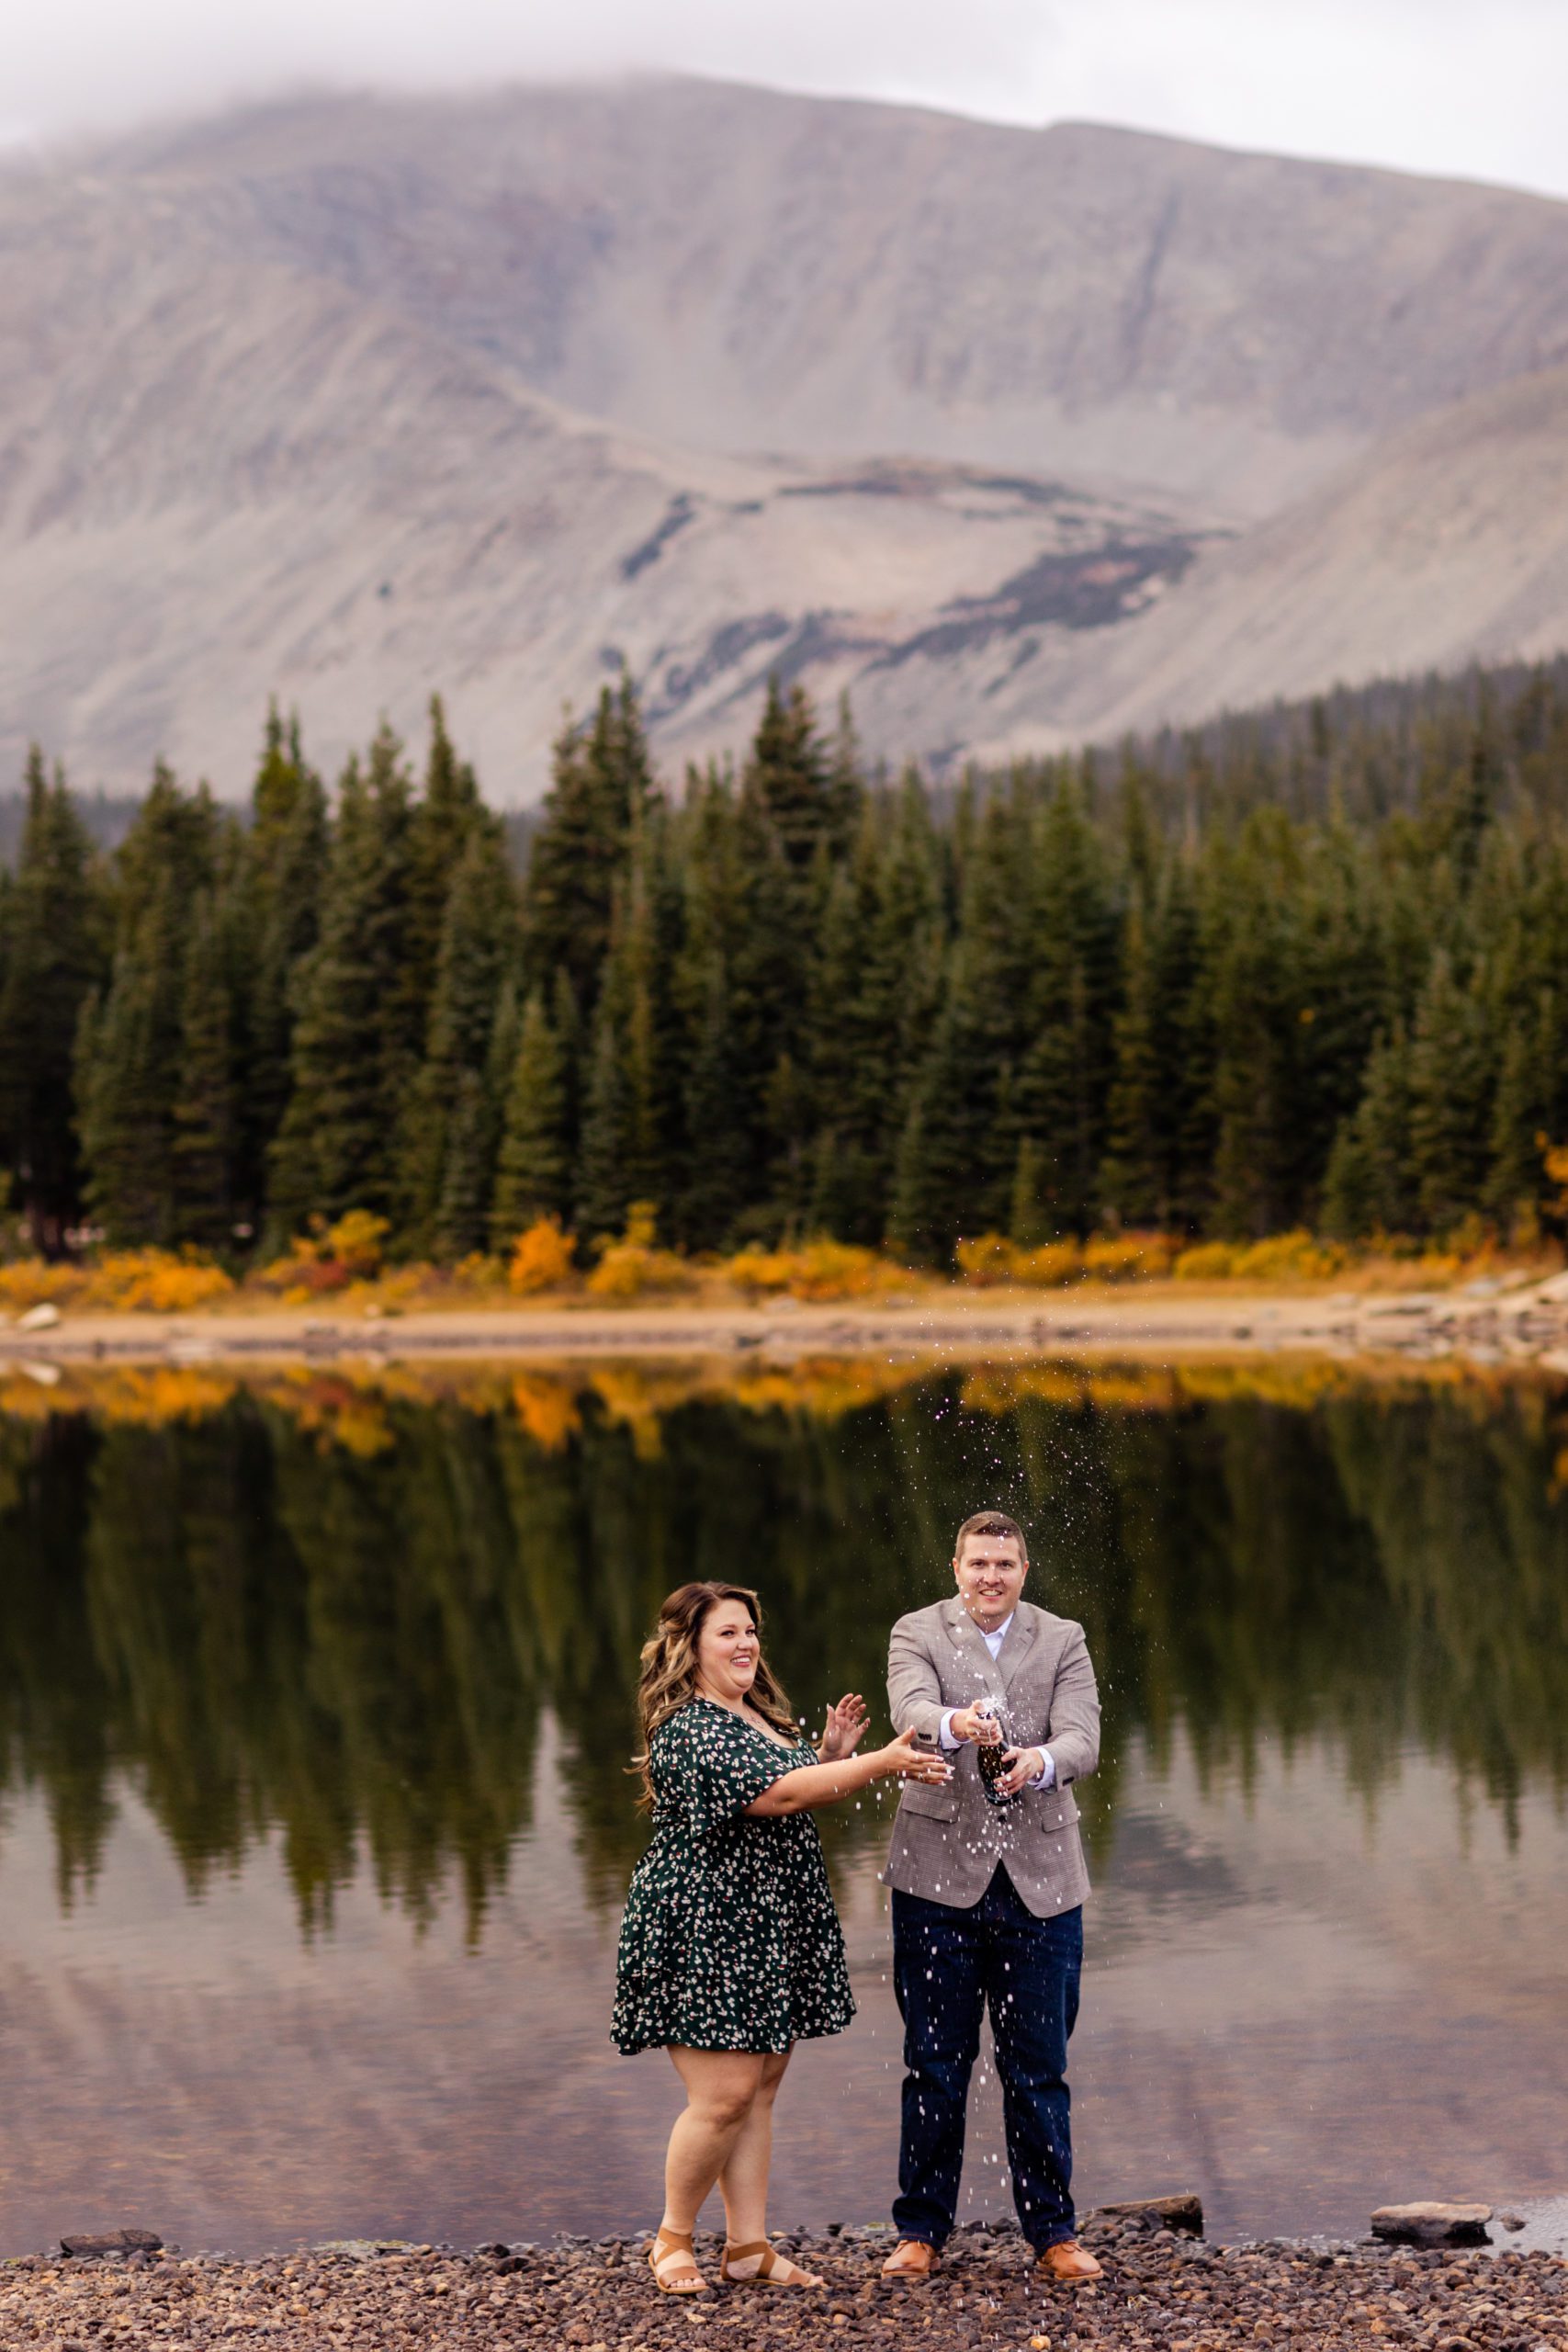 Champagne popping engagement photos, Colorado engagement photos, Brainard Lake Engagement Photos, Rocky Mountain Engagement Photos, Fall engagement photos, what to wear for engagement photos, engagement photo outfit inspiration, fall engagement photo outfits, mountain engagement photo ideas